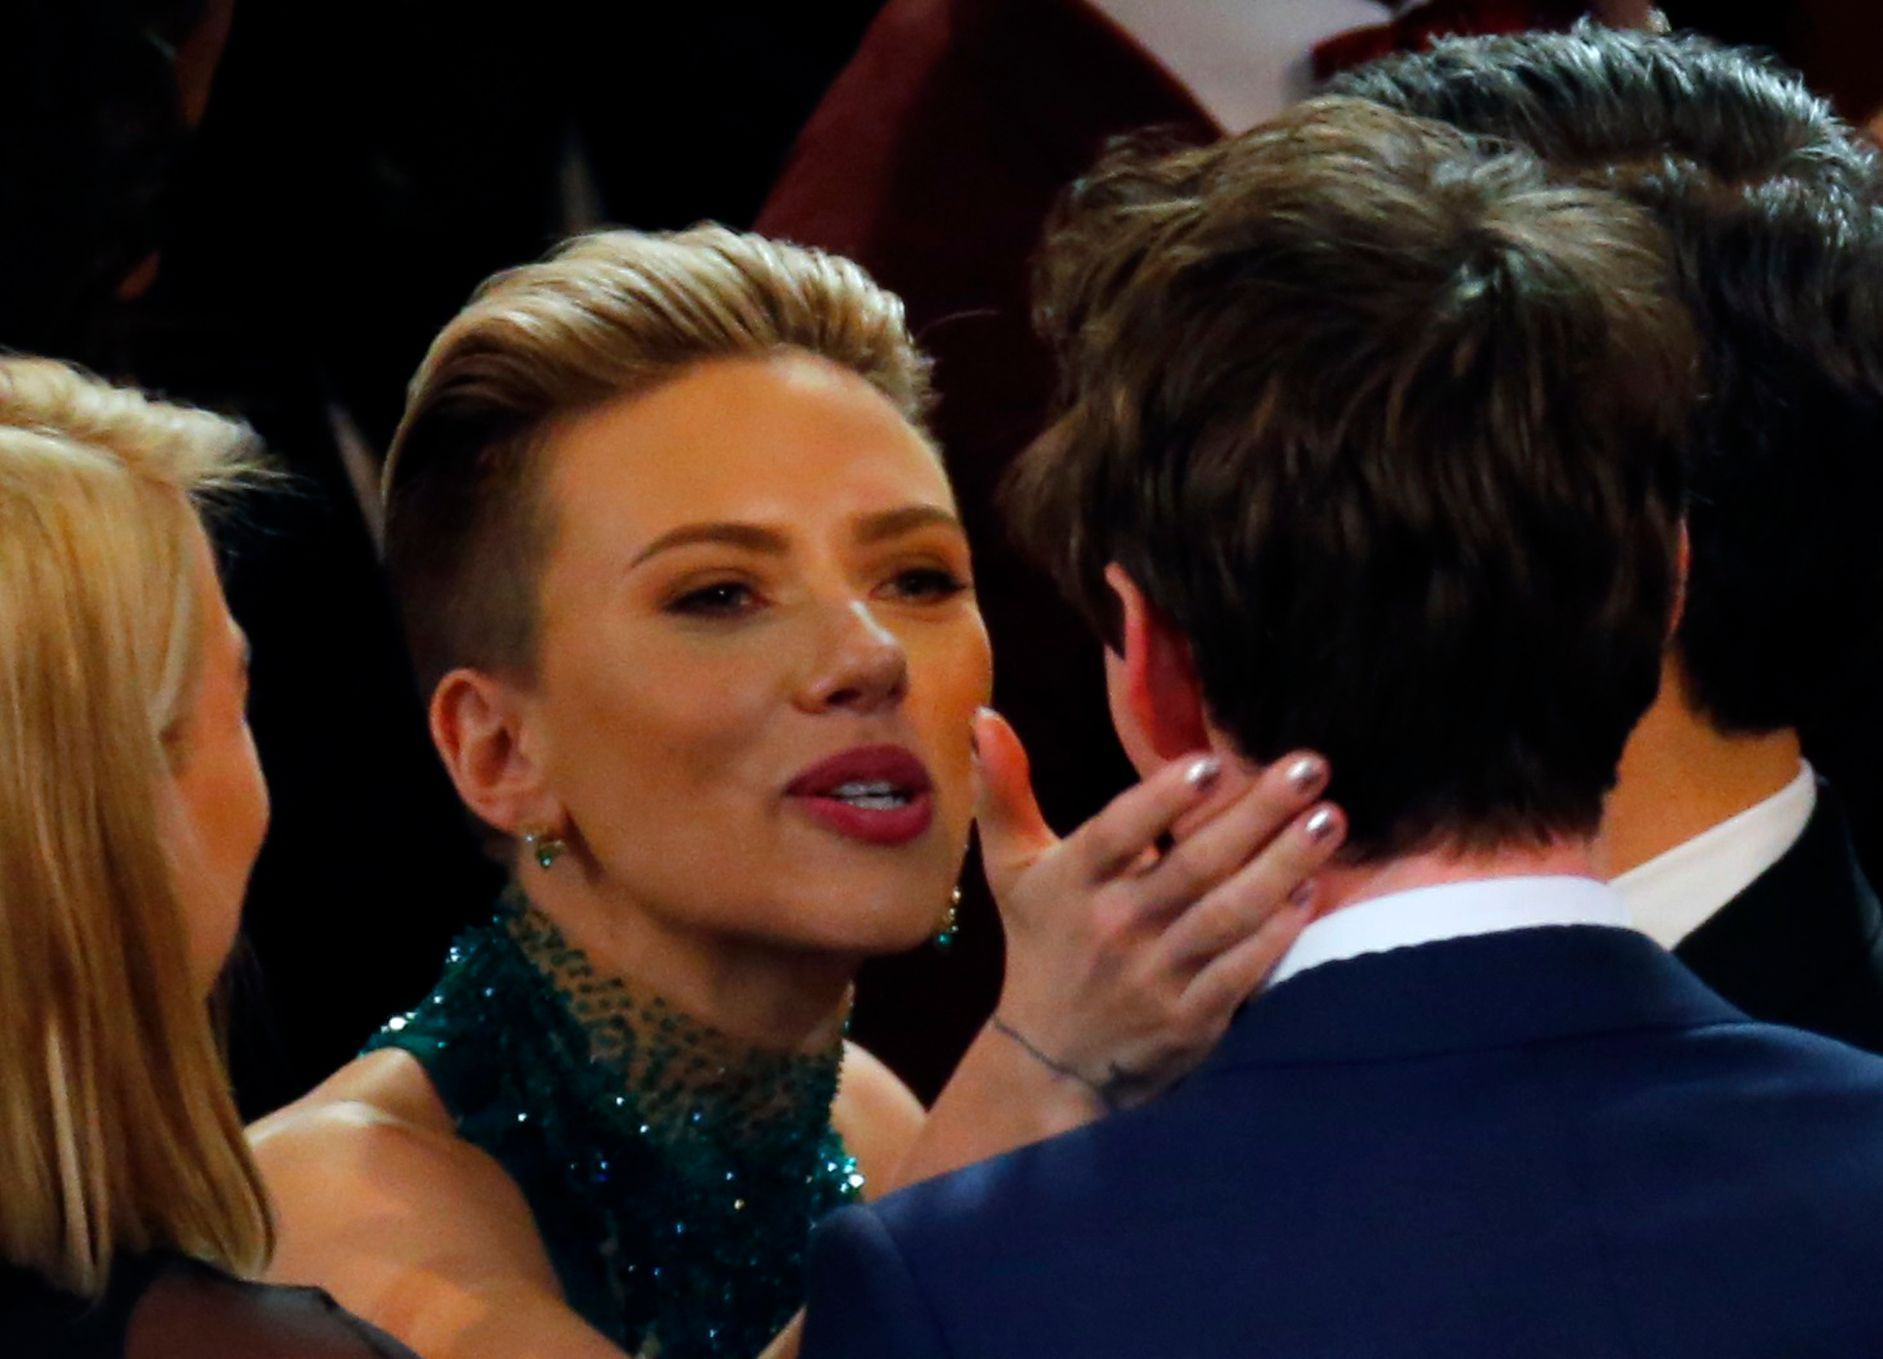 Scarlett Johansson embraces best actor winner Eddie Redmayne after the show at the 87th Academy Awards in Hollywood, California